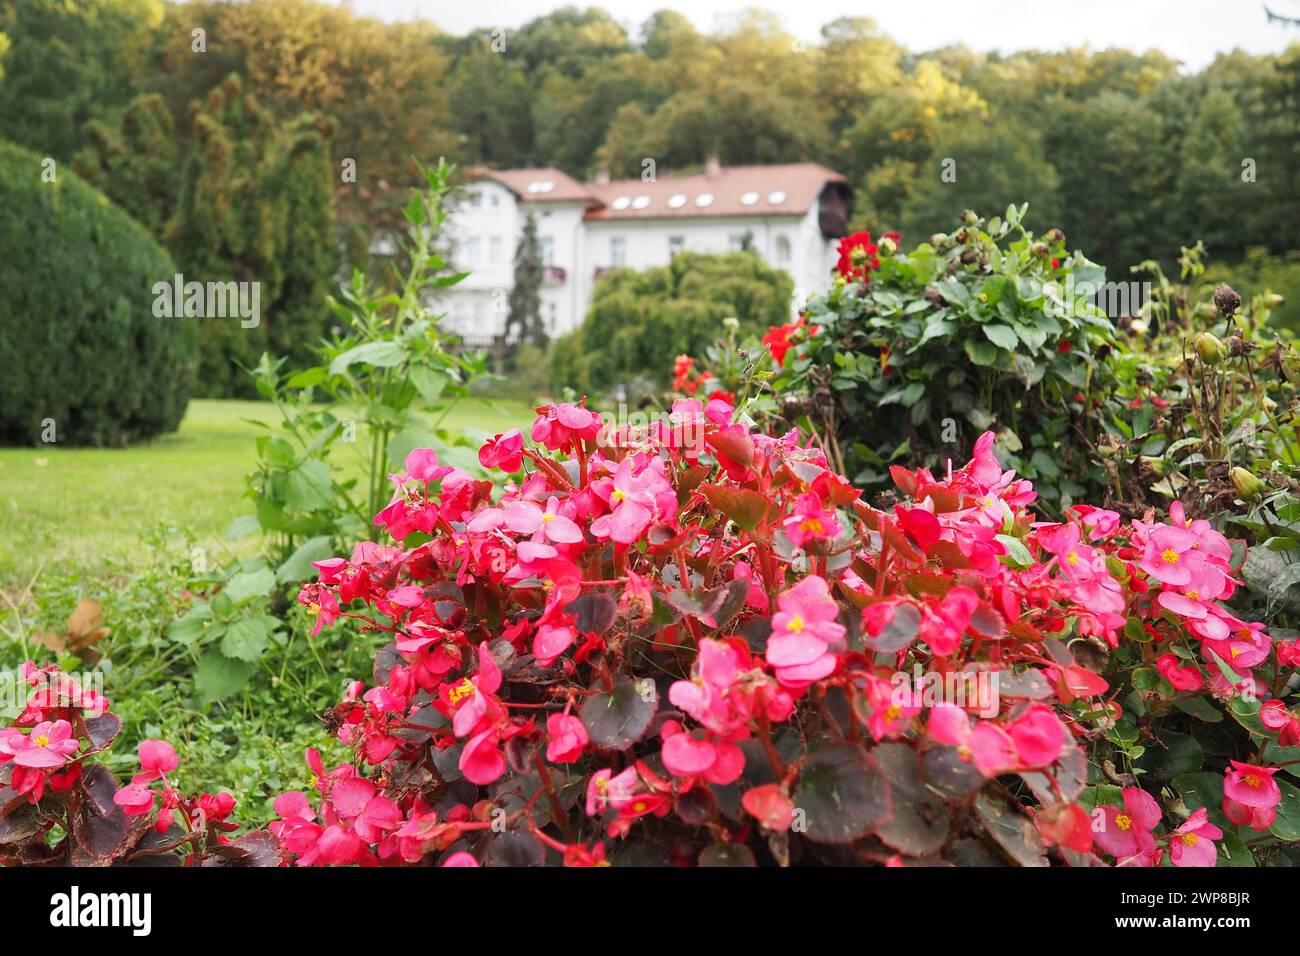 Banja Koviljaca, Serbia, Guchevo, Loznica, September 30, 2022 A medical building, the former royal villa. Green lawn in the park with flowers and Stock Photo